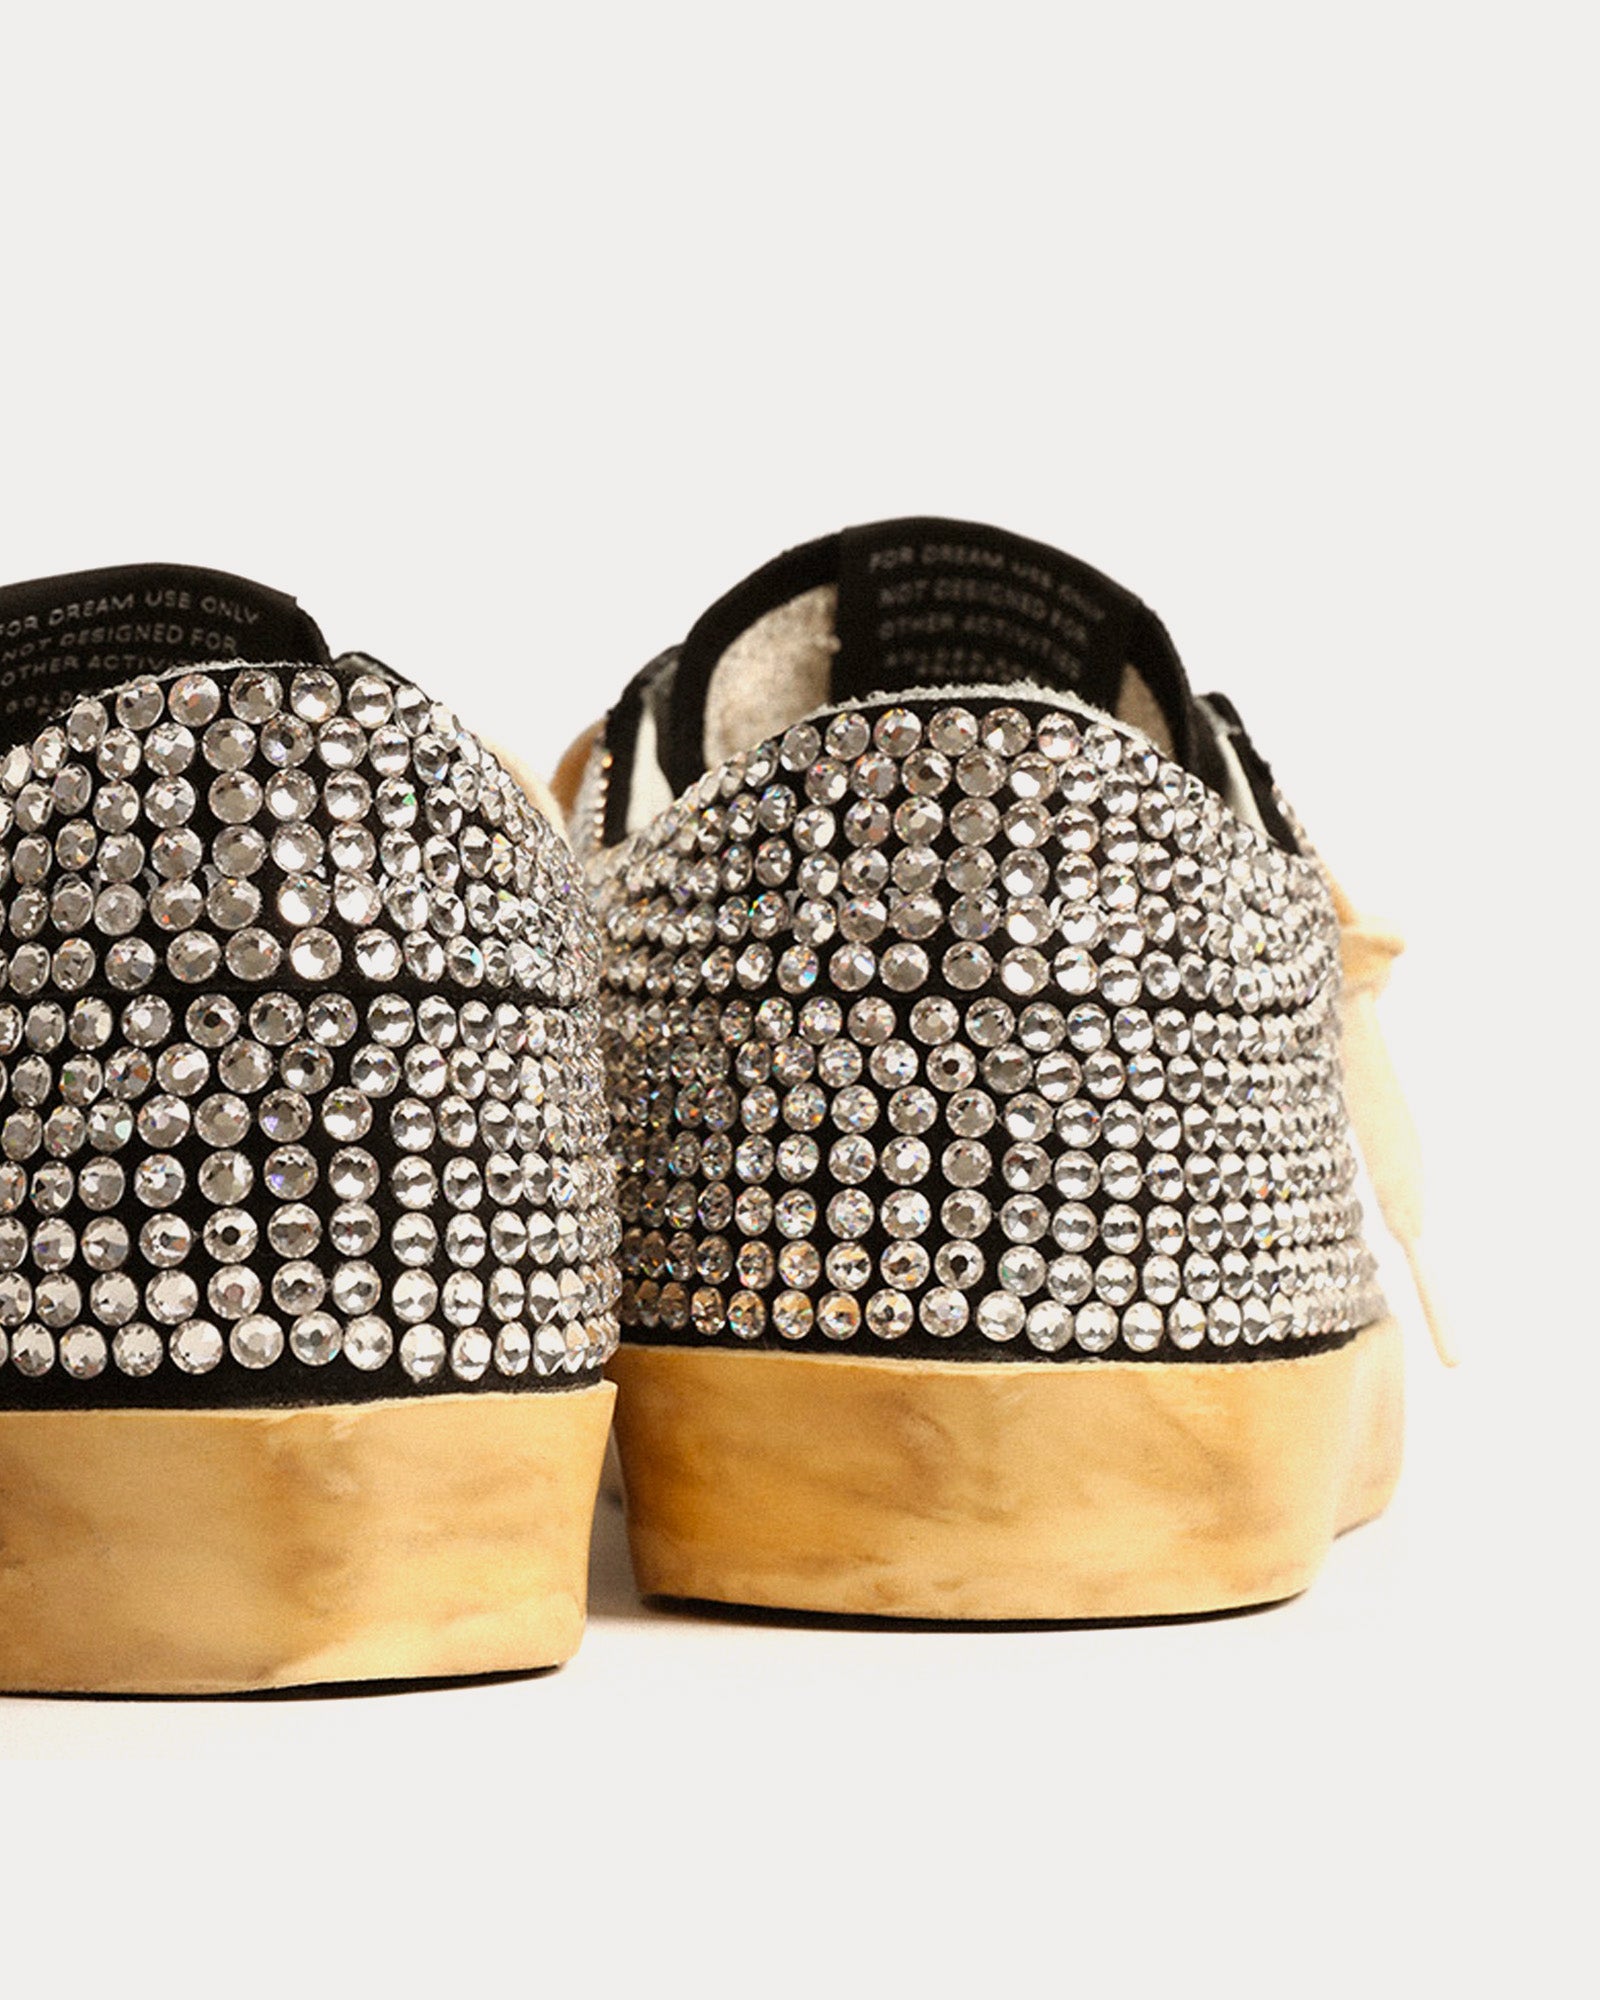 Golden Goose - Super-Star LTD with Swarovski Crystals & Leather Star Black Low Top Sneakers